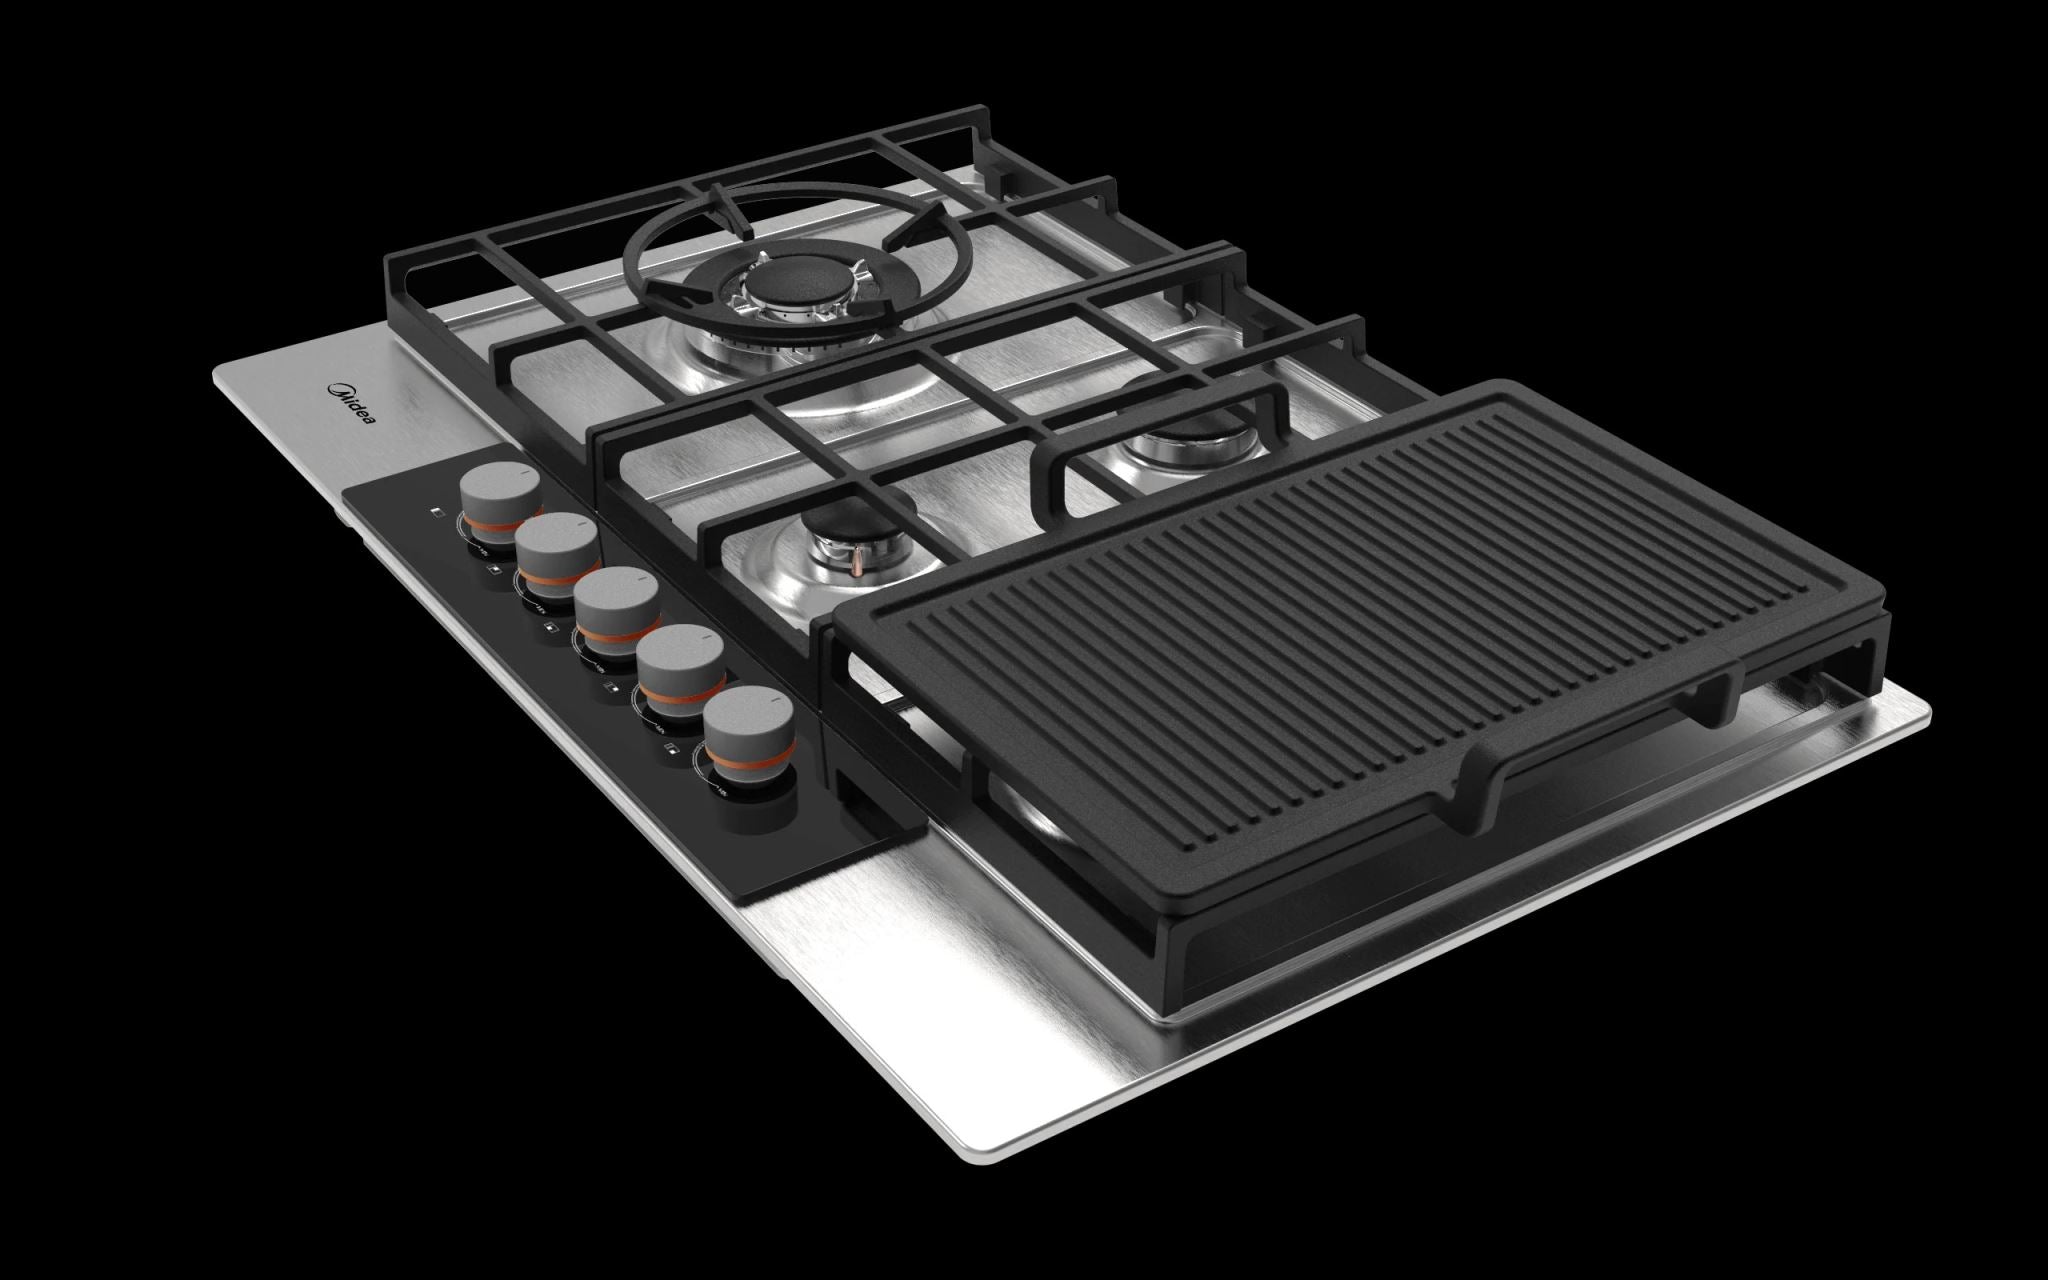 Midea 75cm 4 Burner Gas Hob Stainless Steel with Grill Plate 75SP021